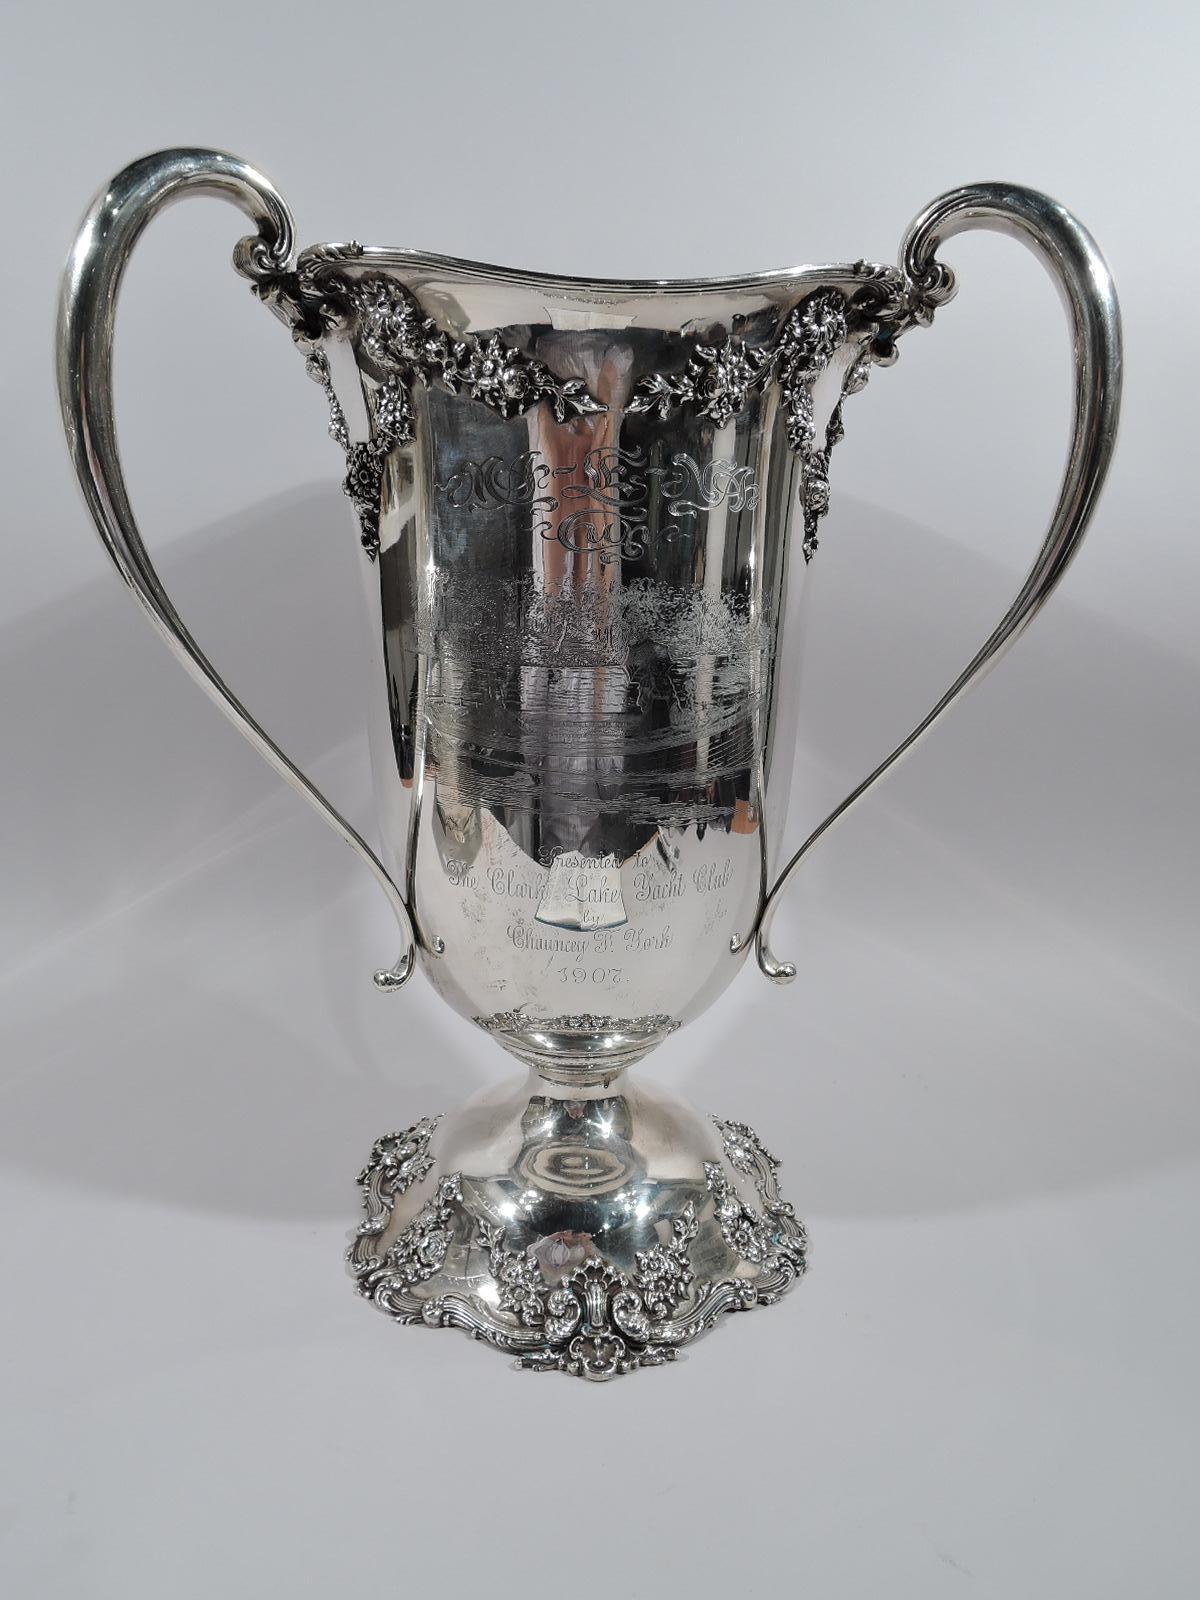 Turn-of-the-century Edwardian sterling silver loving cup. Made by Redlich in New York. Tall urn with three high-looping handles and domed foot. Garland applied to urn top and flowers and shells applied to foot. Rims reeded.
On front are